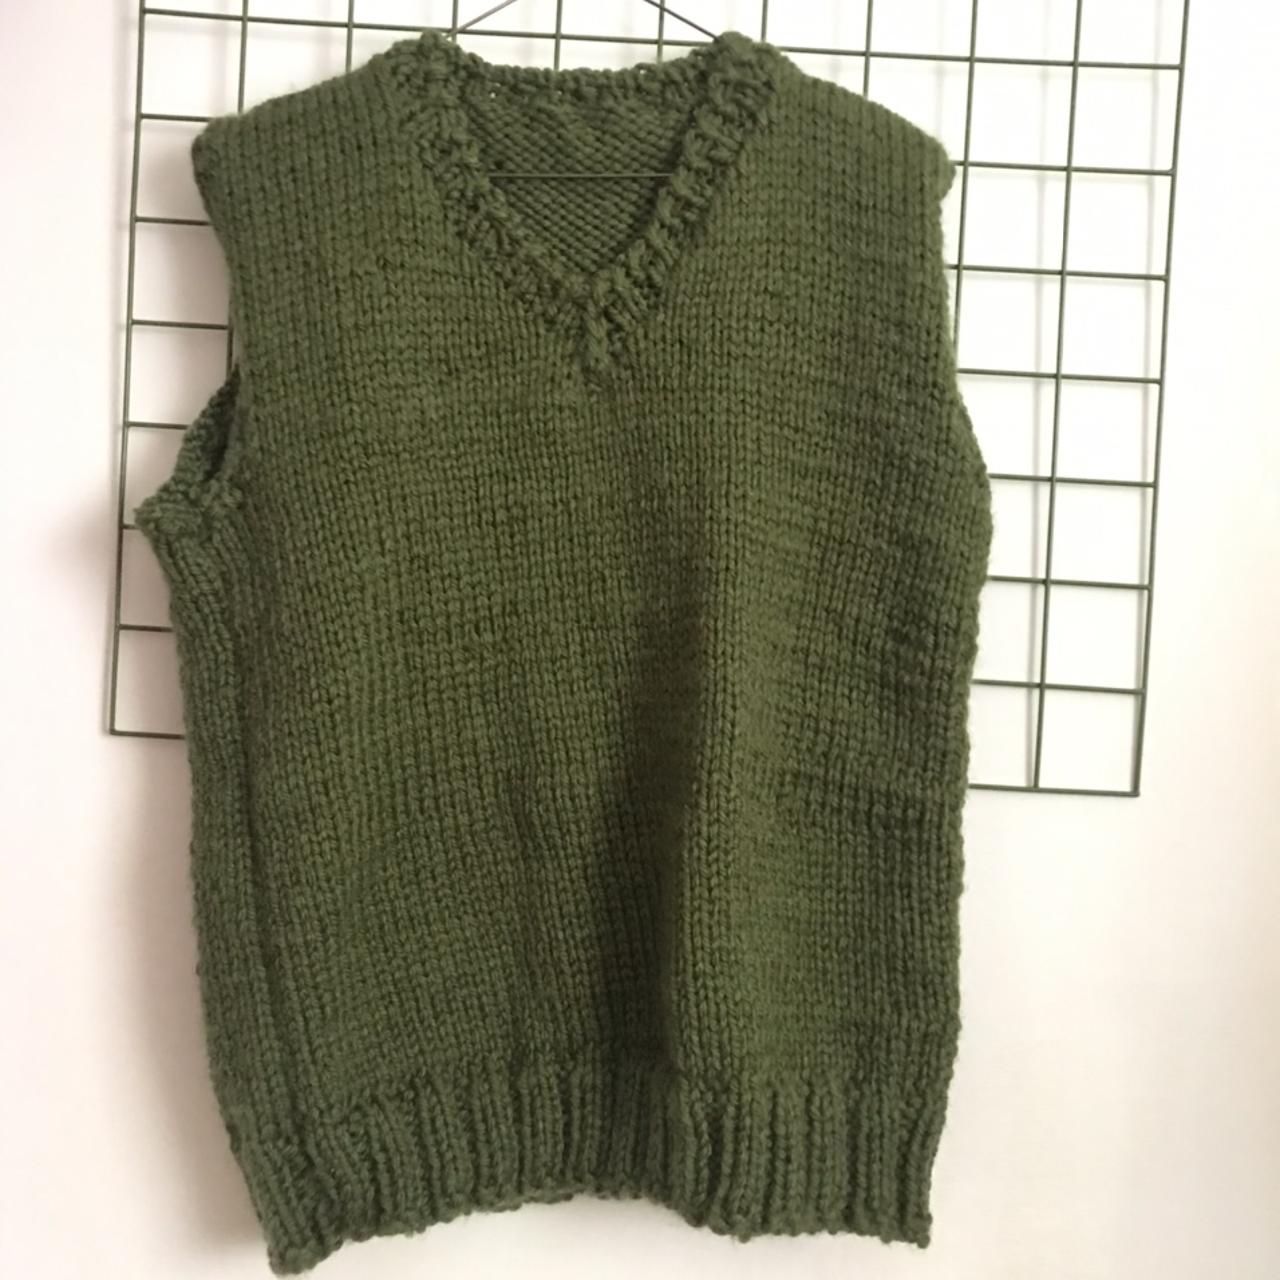 Handknitted sweater vest | arket toast cos and other... - Depop